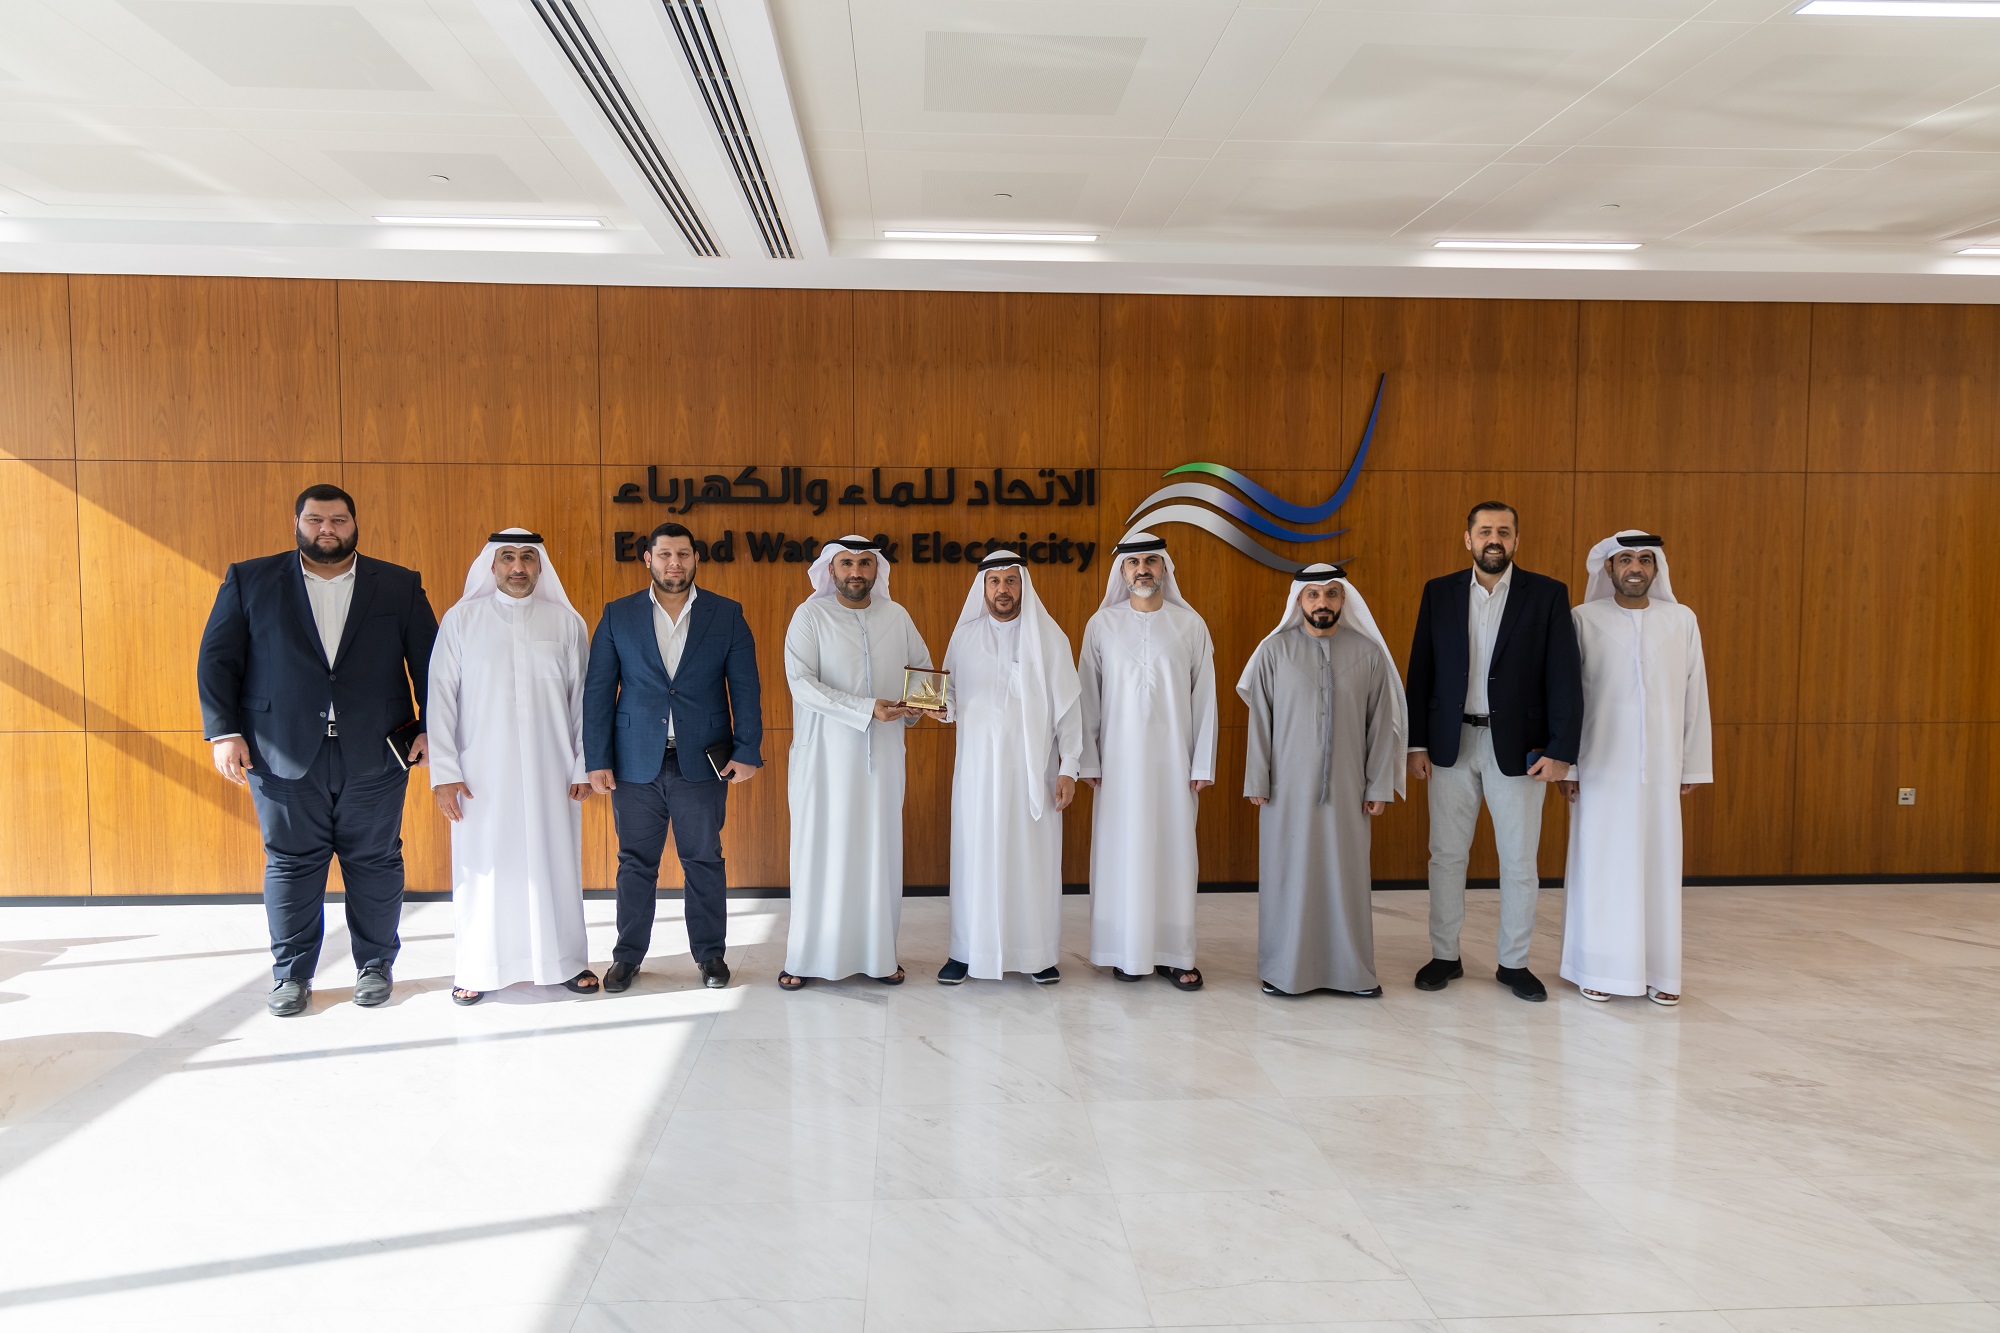 Ajman Chamber and FEWA are discussing opportunities to launch encouraging initiatives for the industrial sector